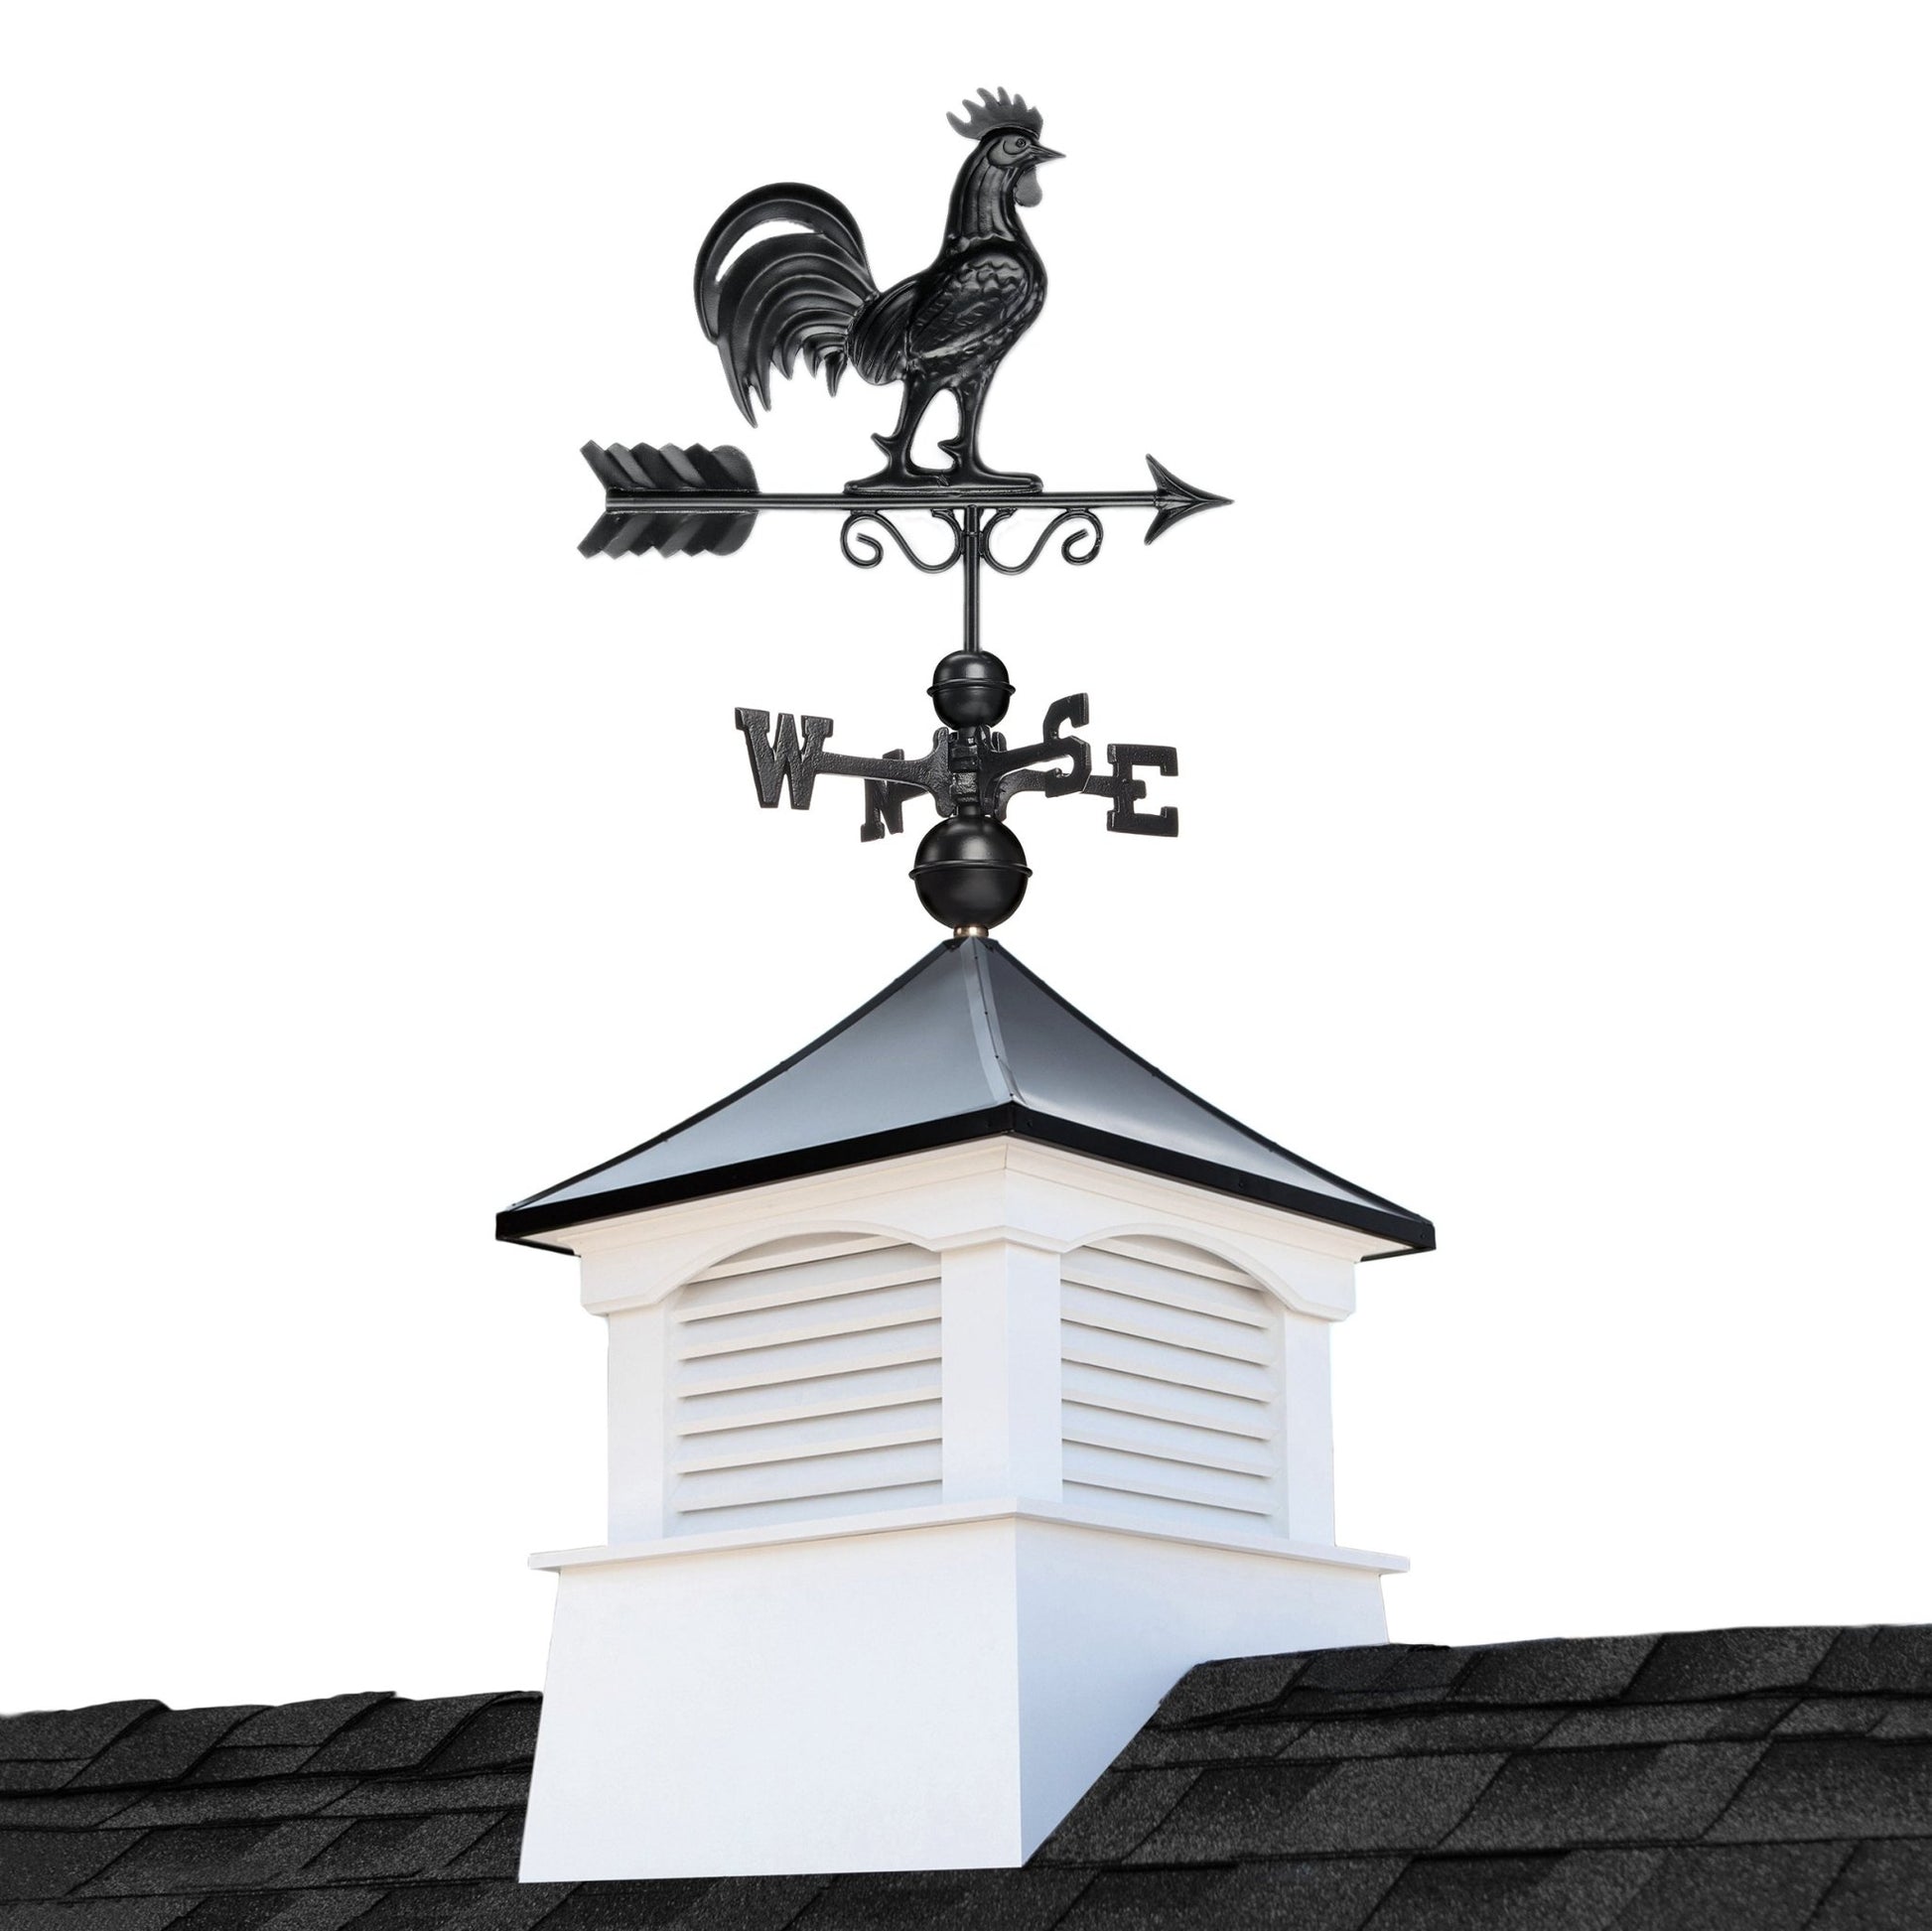 18" Square Coventry Vinyl Cupola with Black Aluminum roof and Black Aluminum Rooster Weathervane by Good Directions - Good Directions